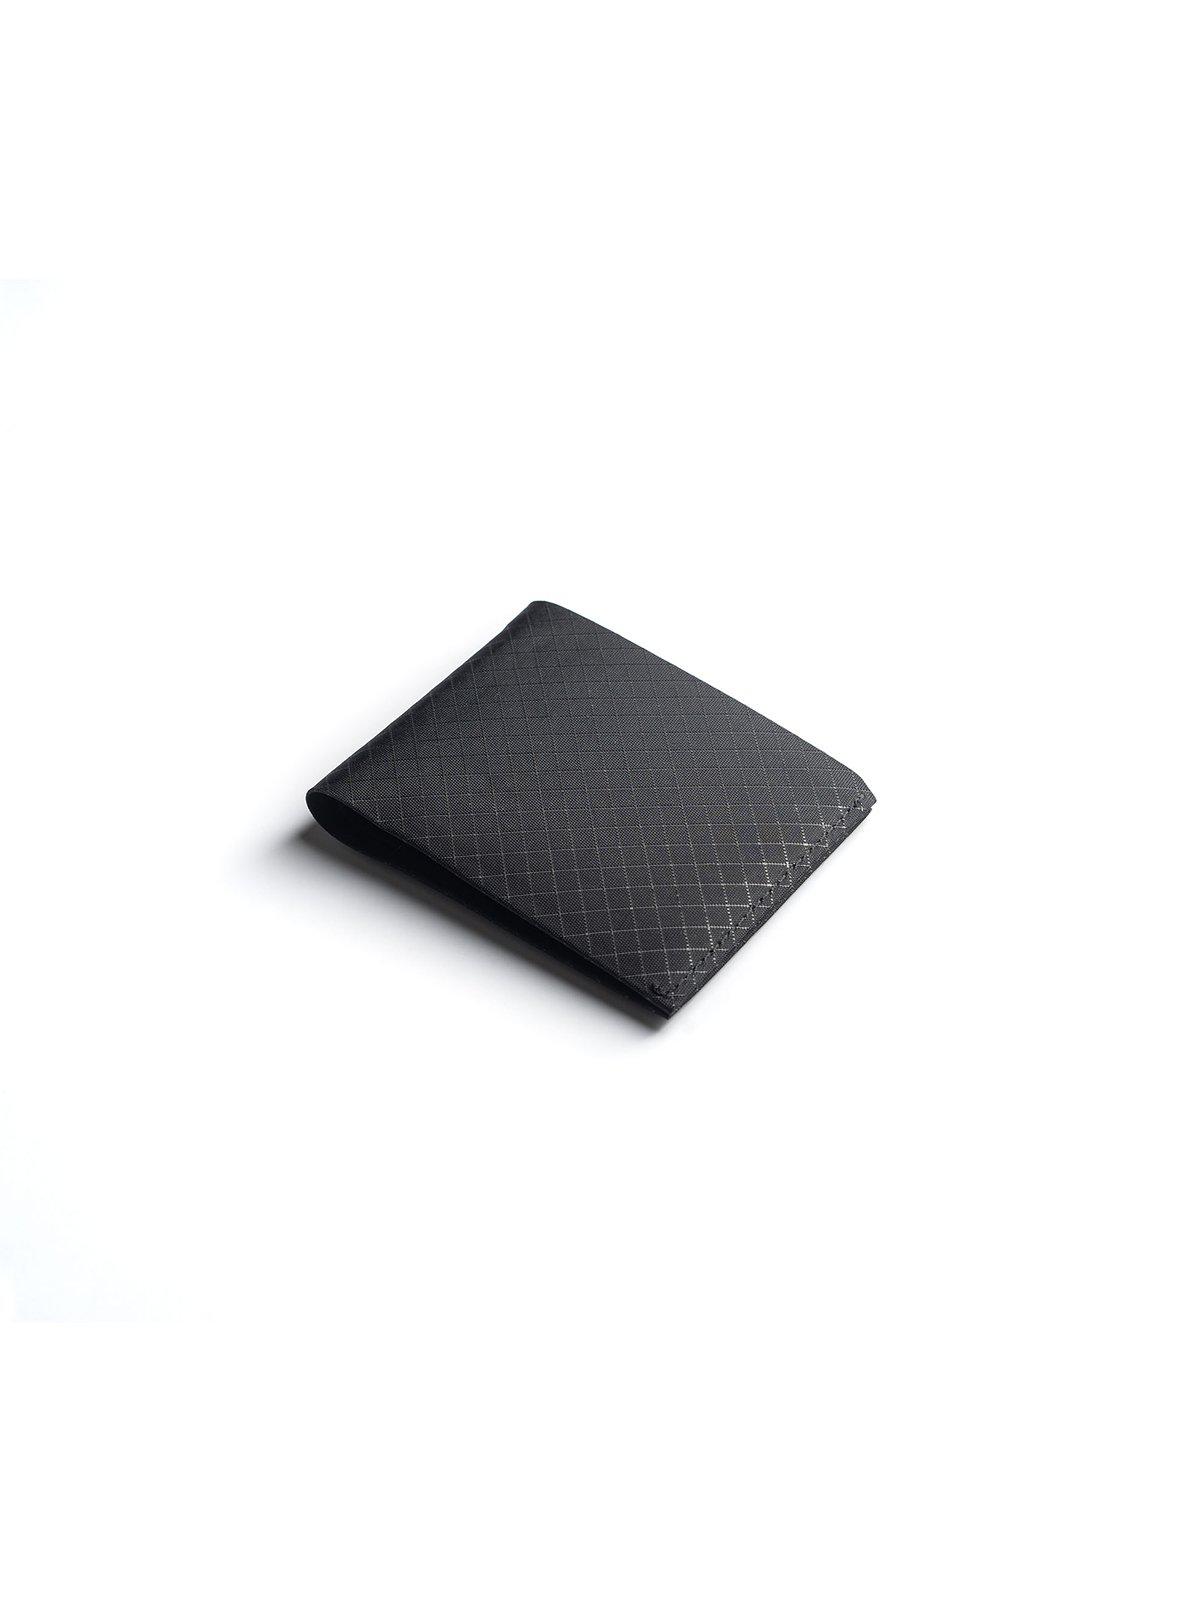 Pioneer The Flyfold Wallet 10XD Ripstop Onyx RFID - MORE by Morello Indonesia